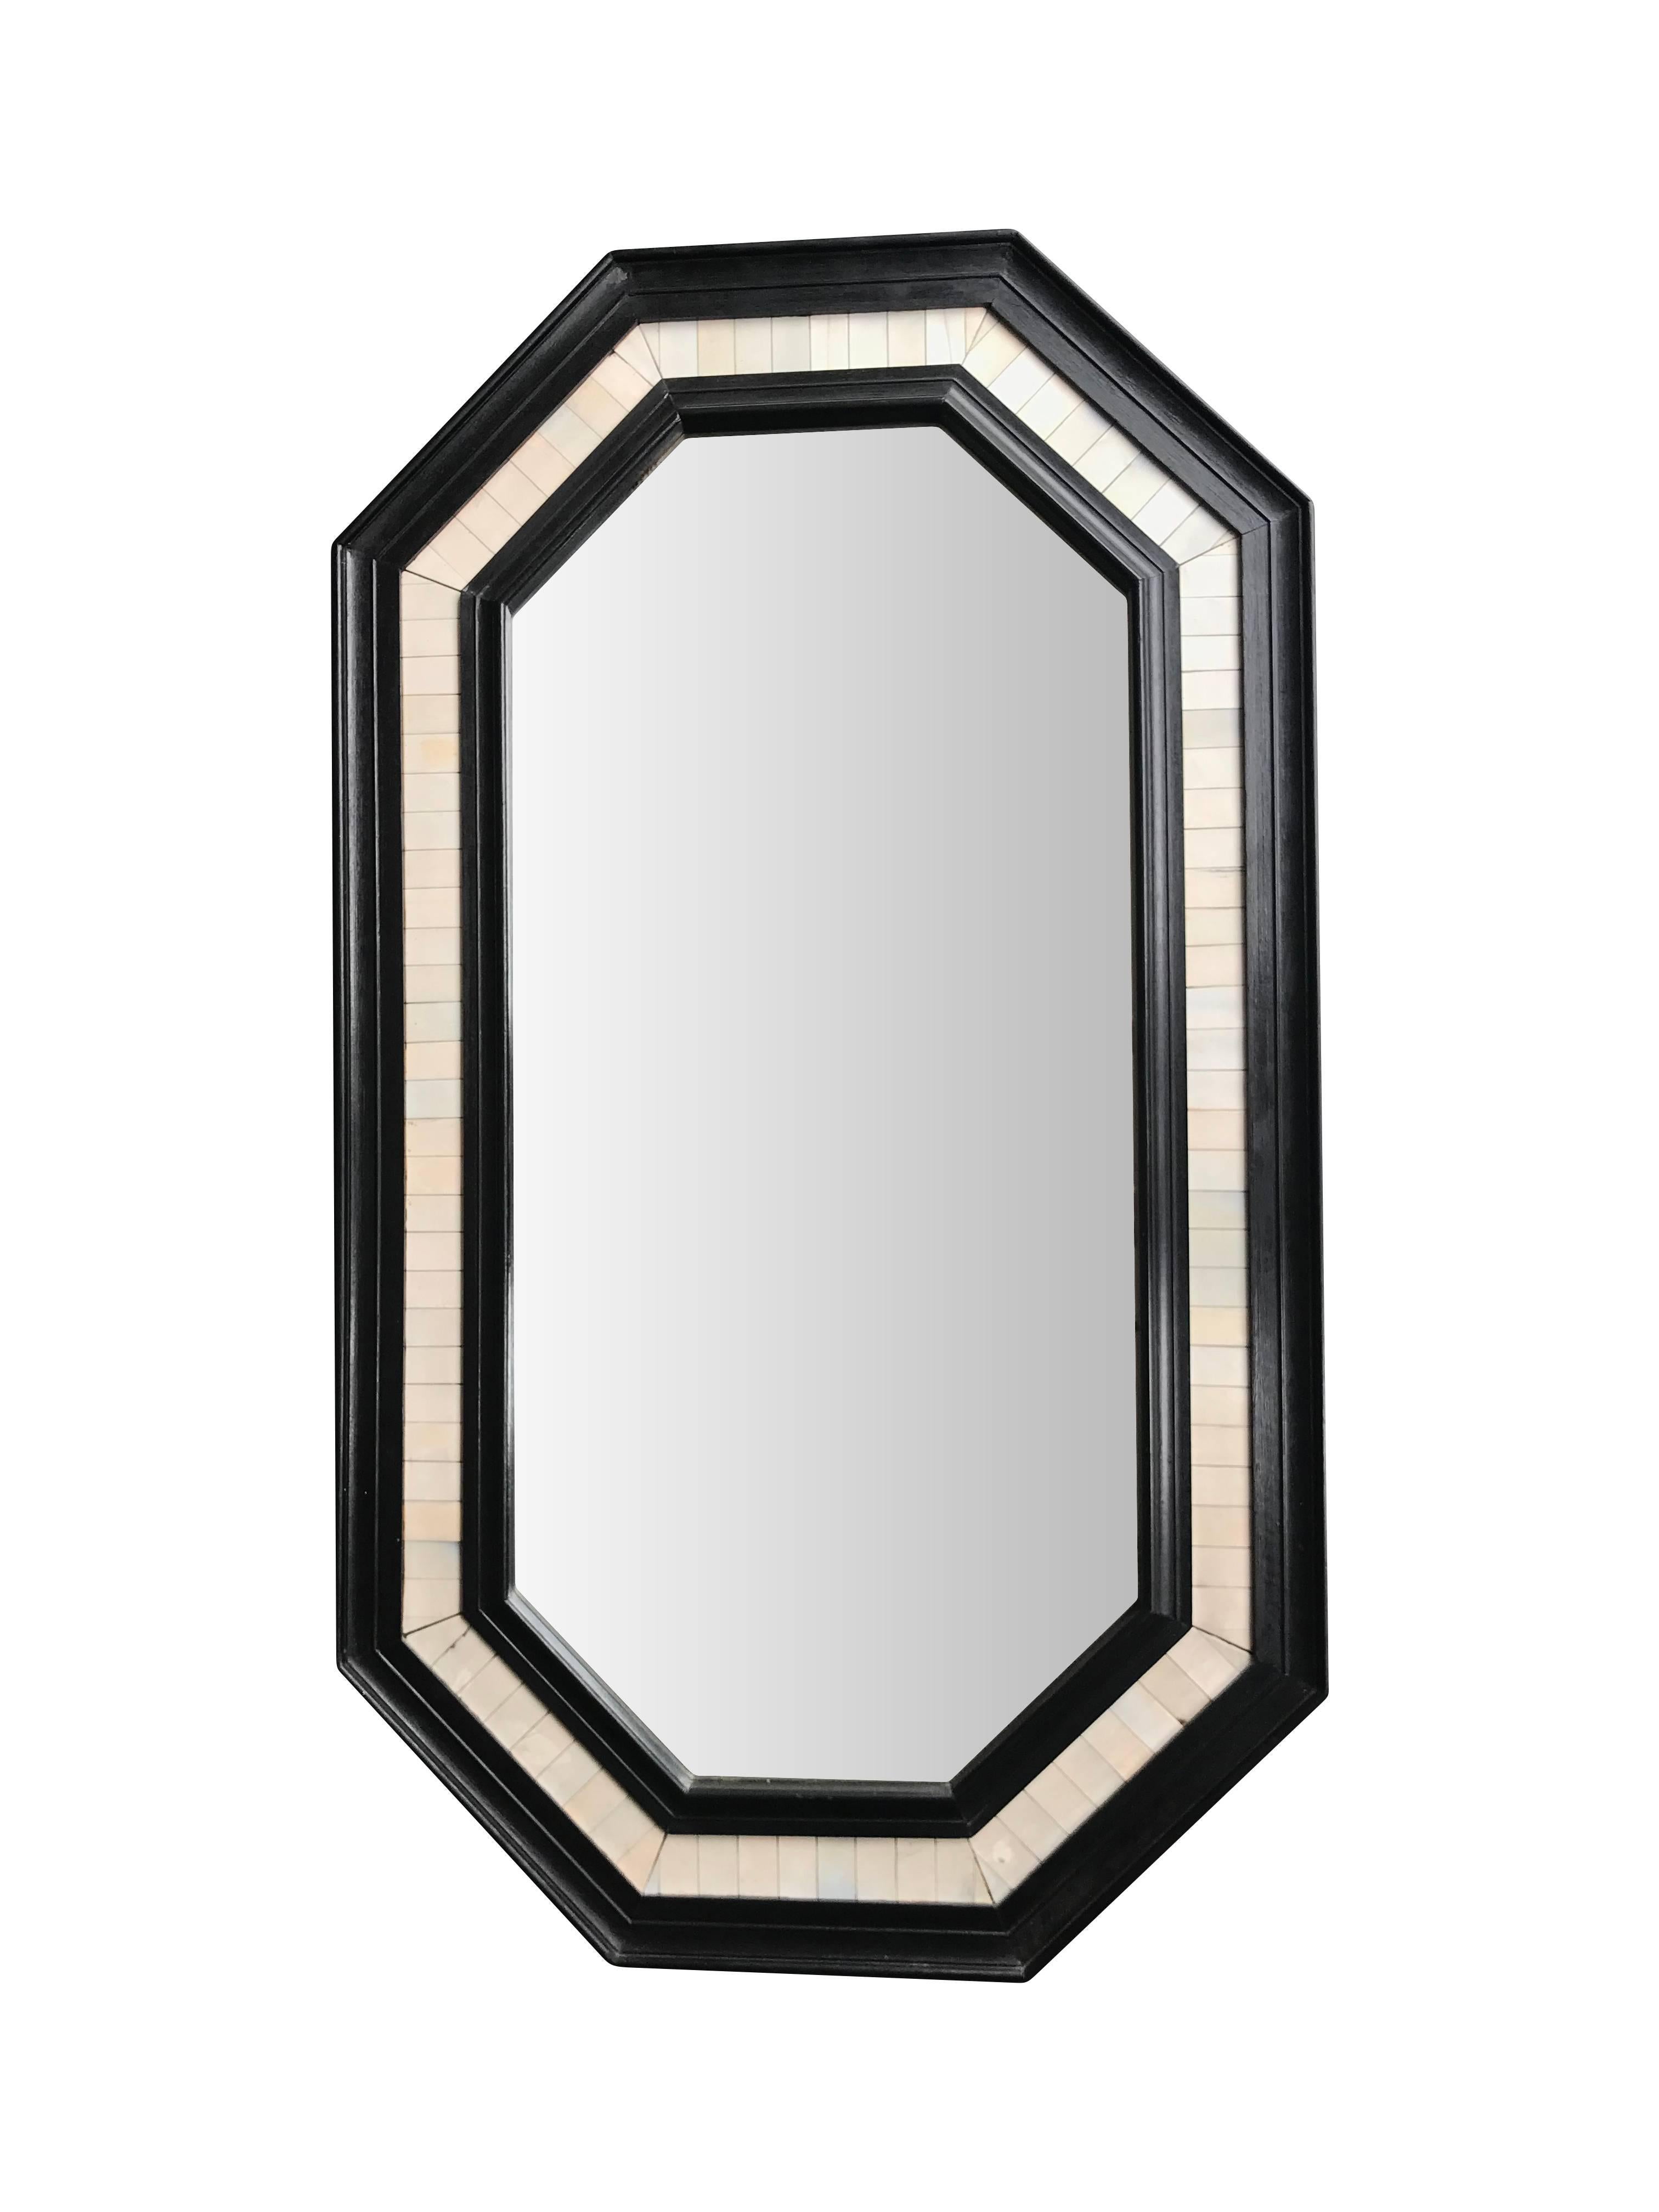 An octagonal ebonized wooden framed mirror with bone inlay surround and bevelled mirror.